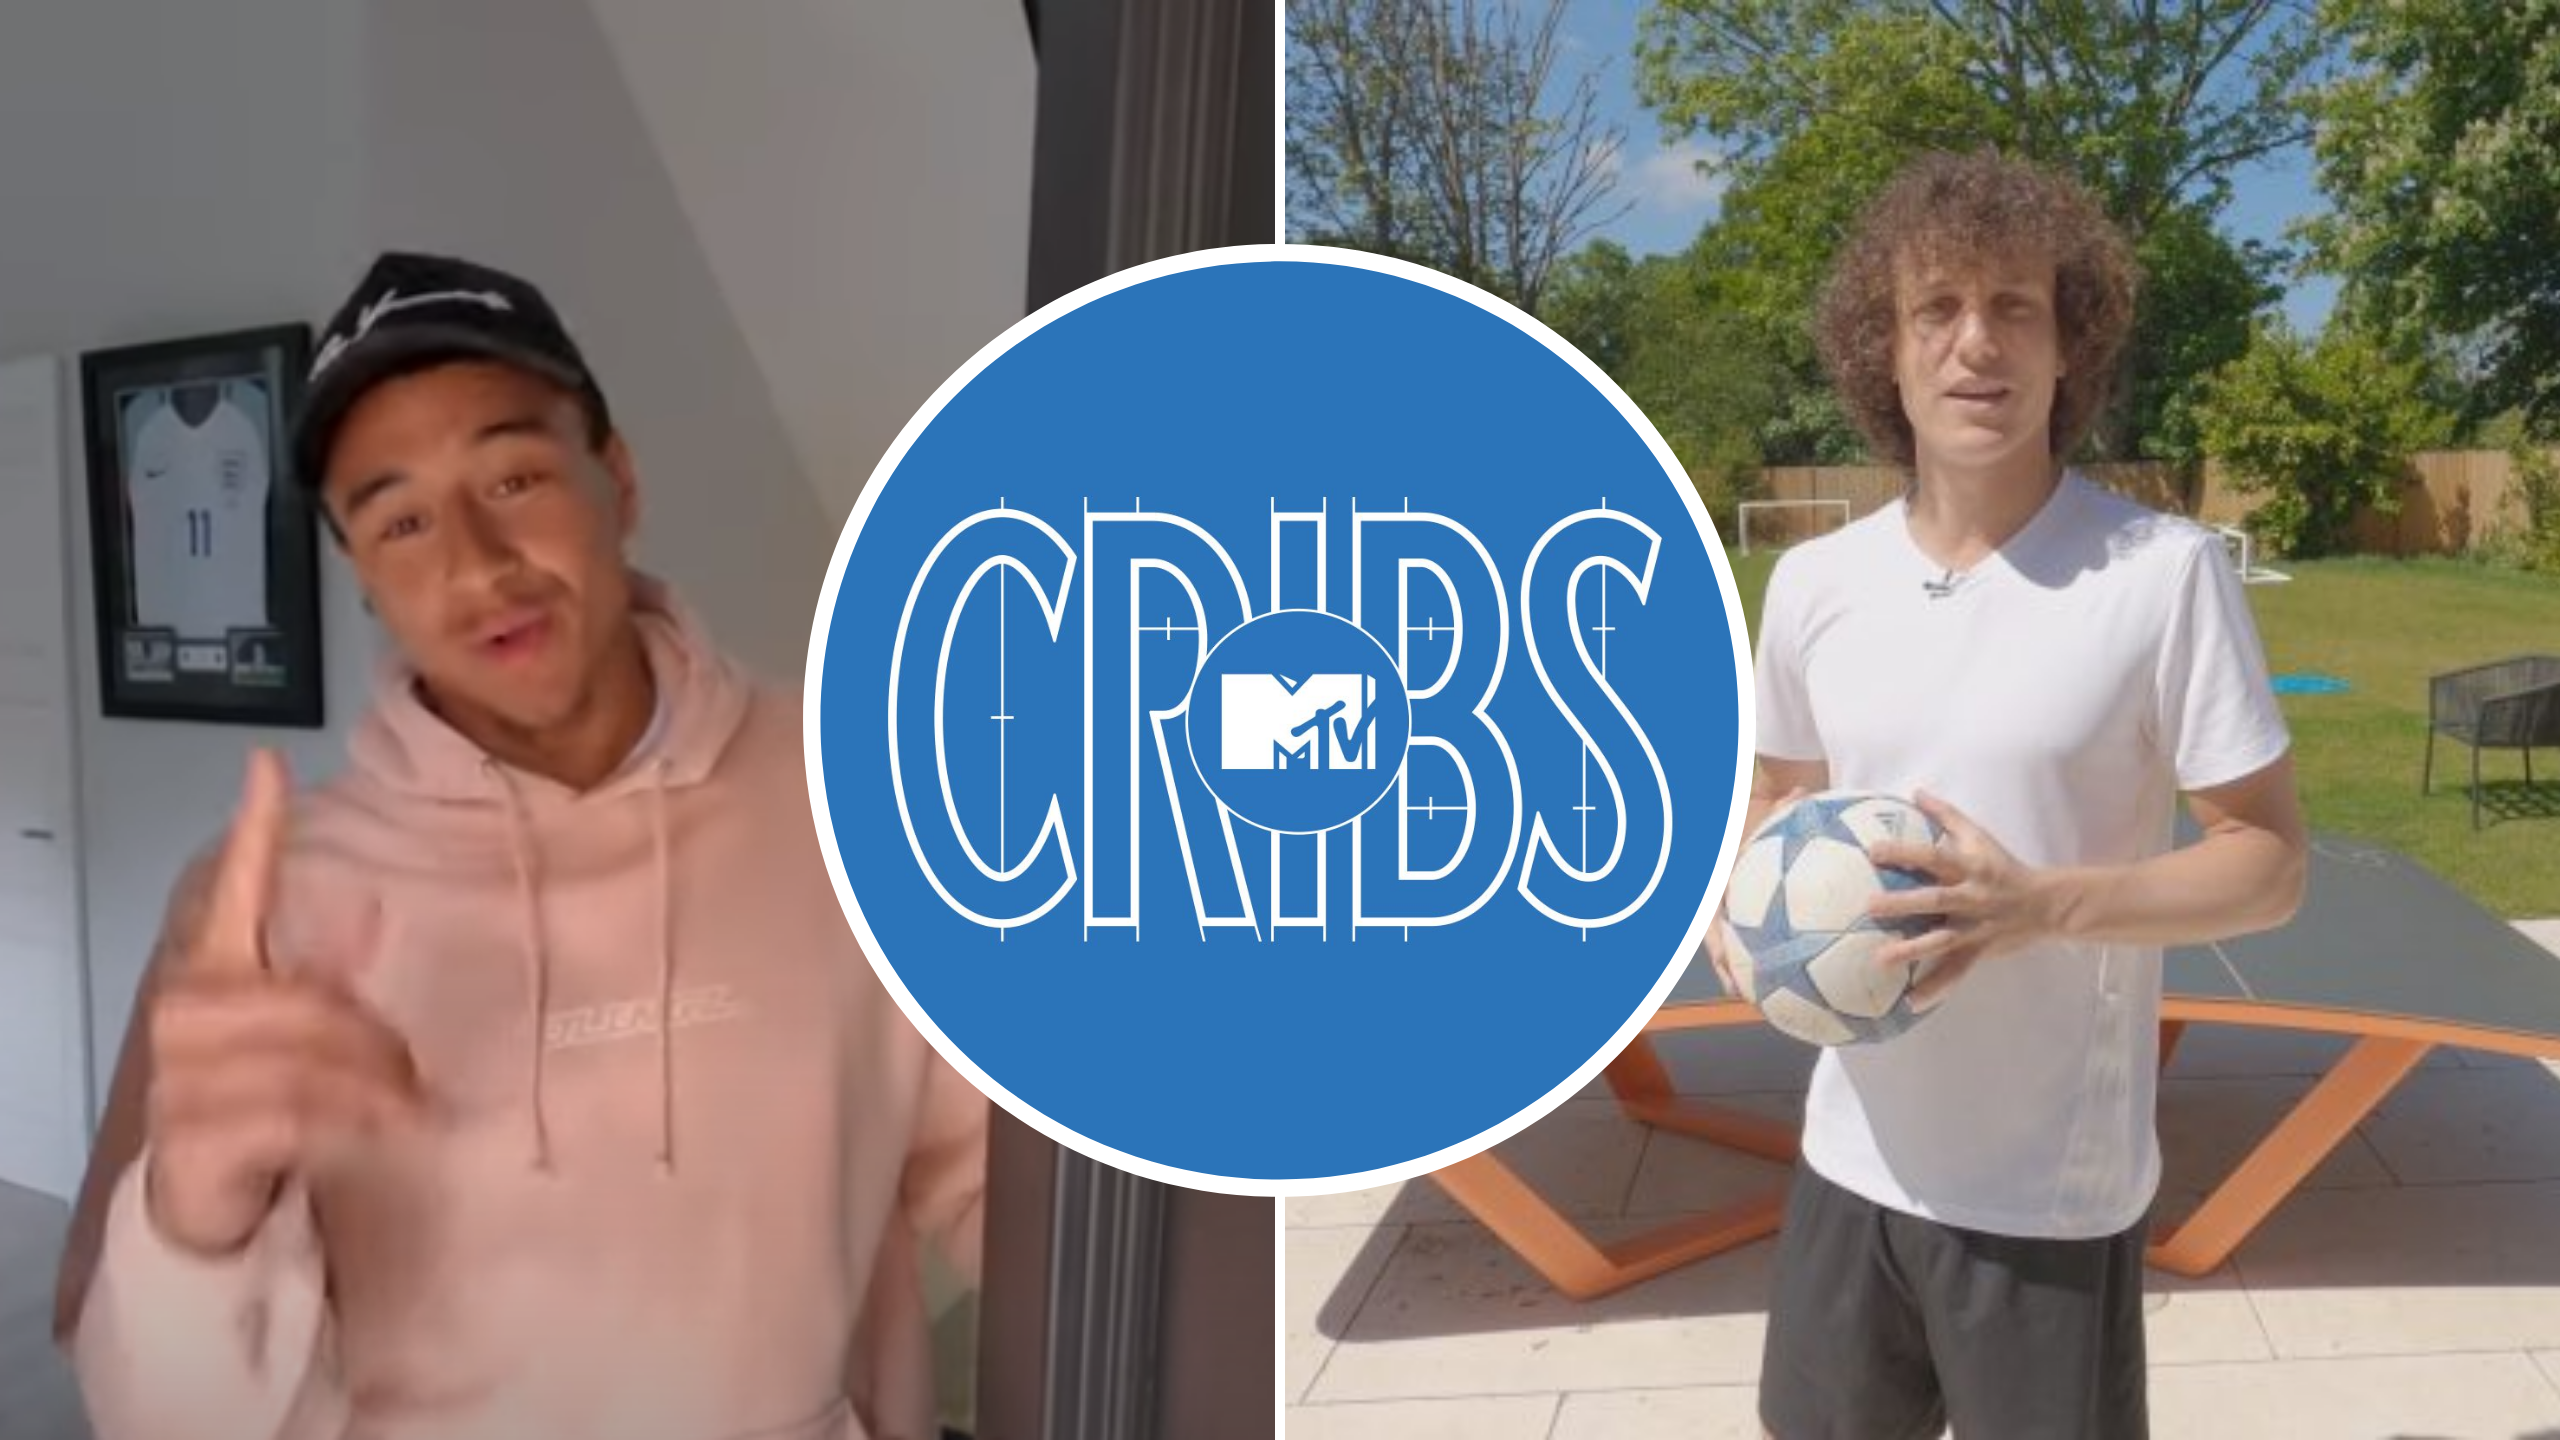 MTV Cribs: Footballers Stay Home Begins This Evening